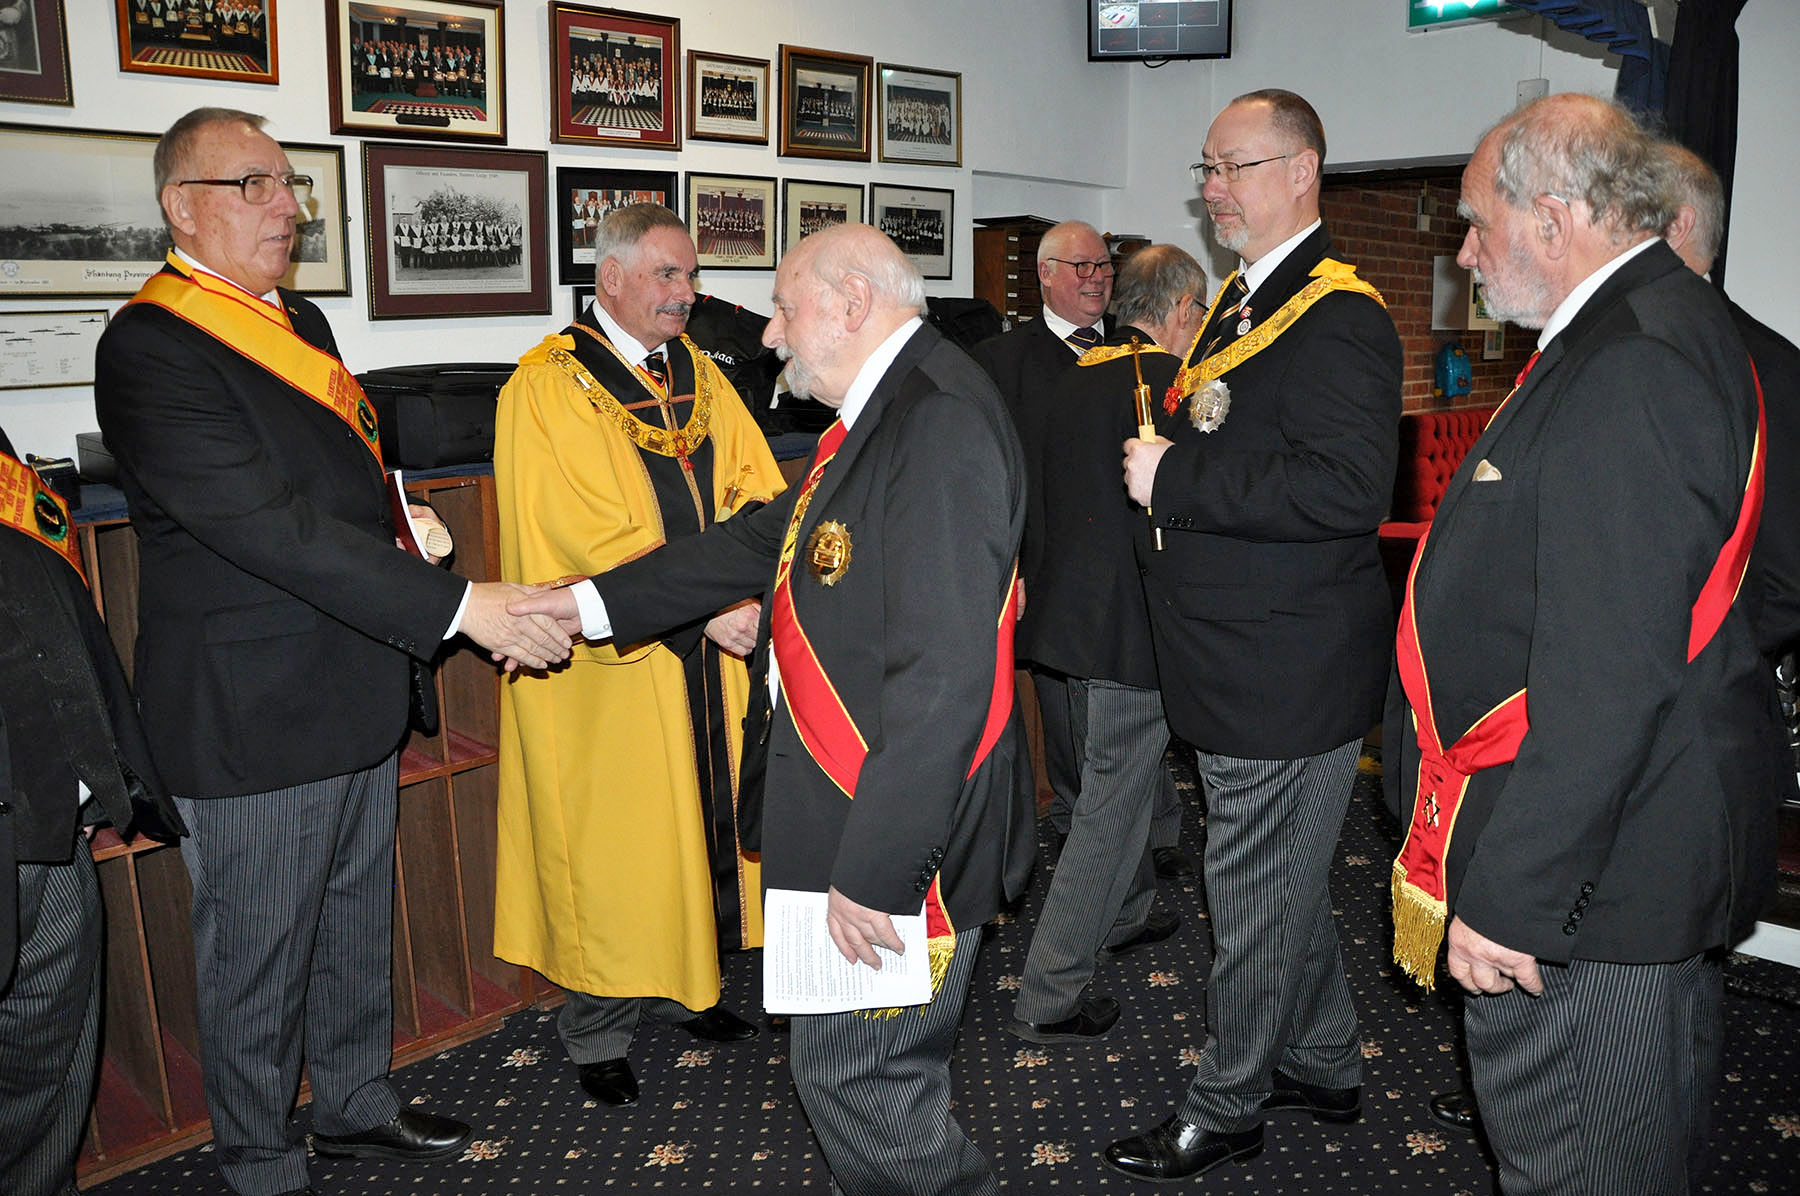 A new Provincial Grand Summus for Hampshire, Isle of Wight, and the Channel Islands